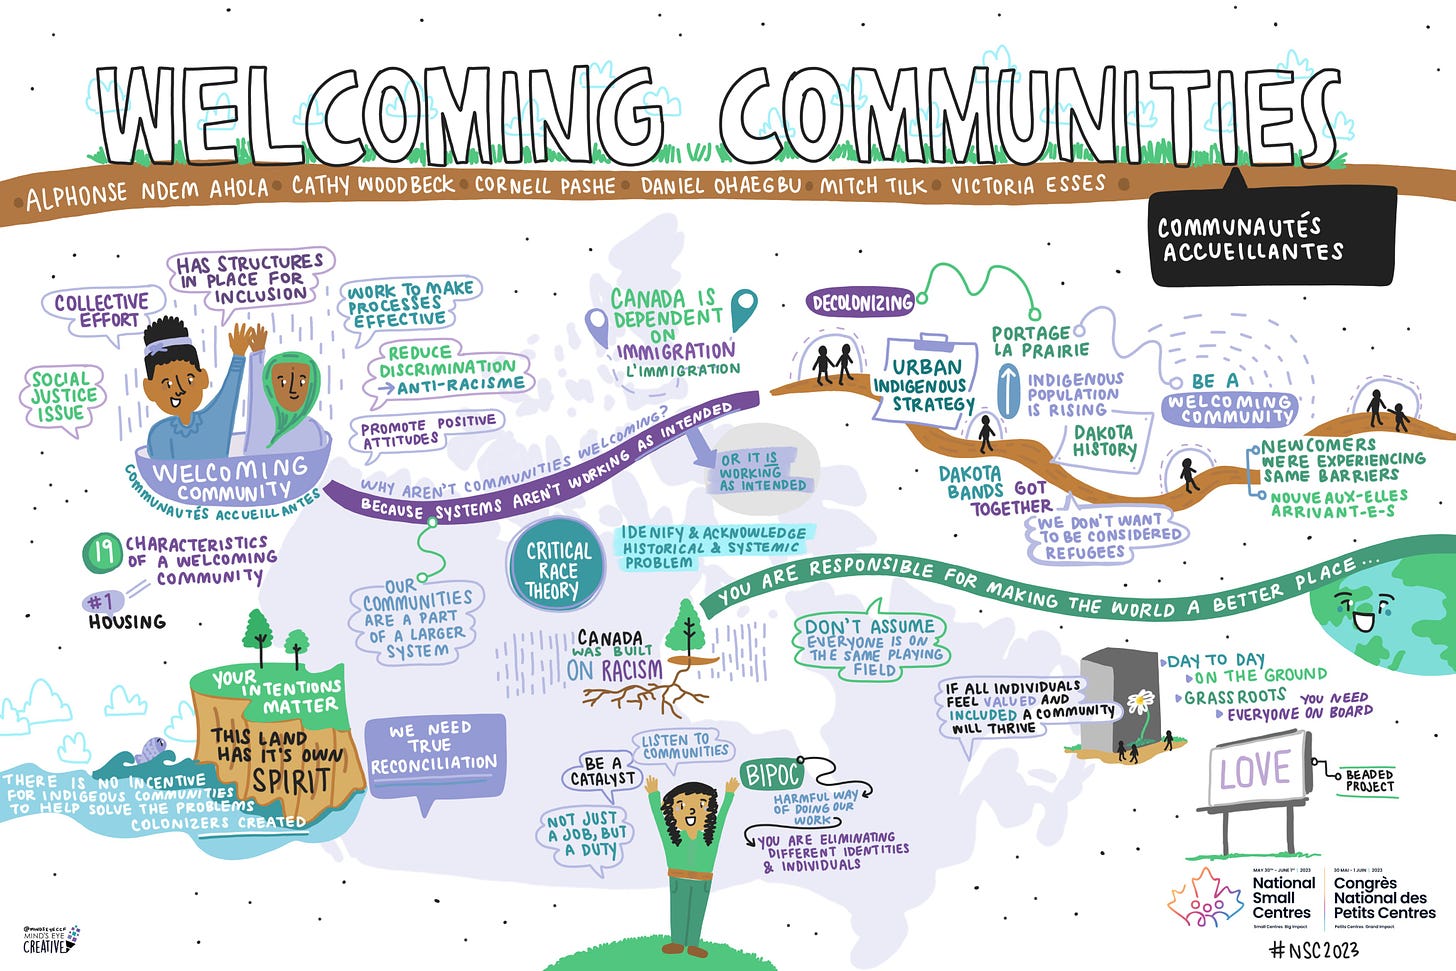 sketchnote titled welcoming communities 